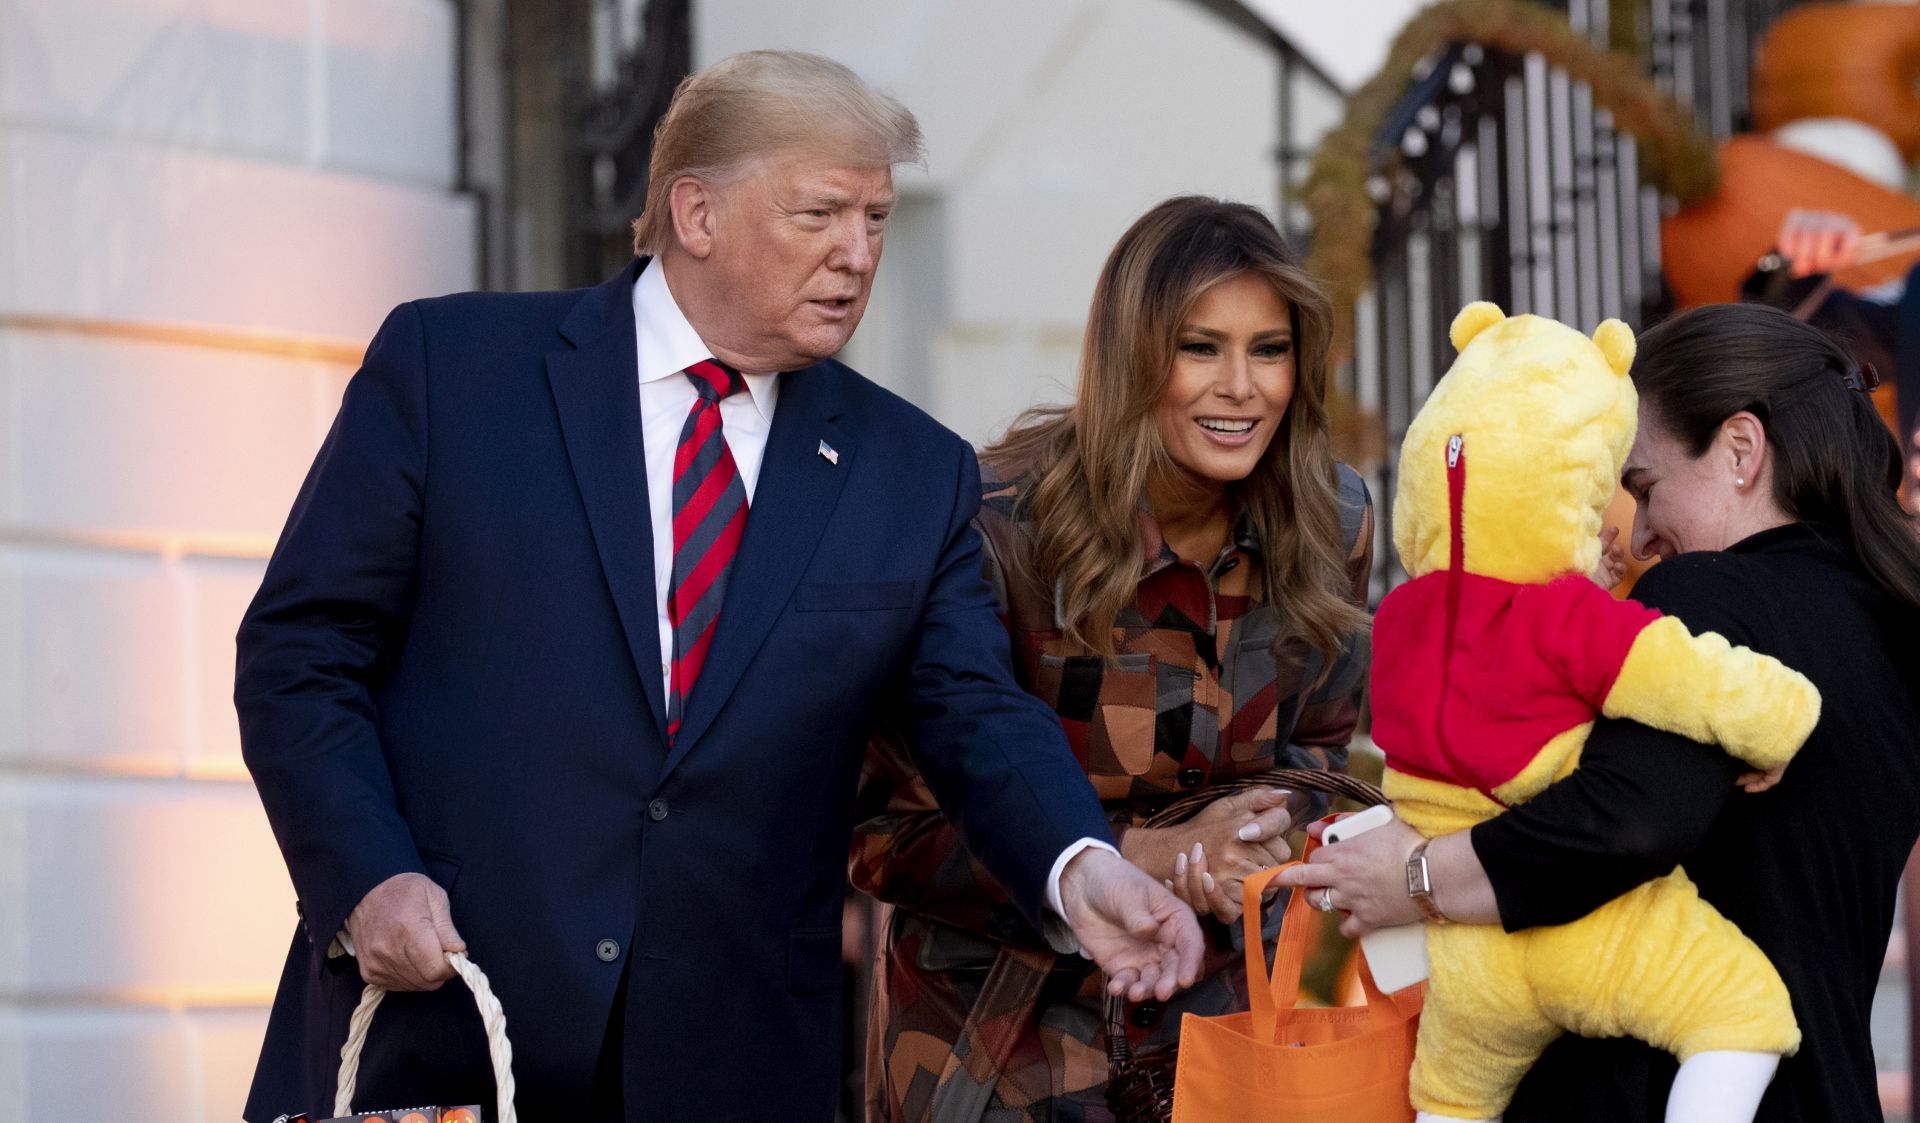 epa07957146 US President Donald J. Trump (L) and First Lady Melania Trump (R) hand out candy to children in costumes during a Halloween event at the White House in Washington, DC, USA, 28 October 2019. Halloween is celebrated 31 October.  EPA/MICHAEL REYNOLDS